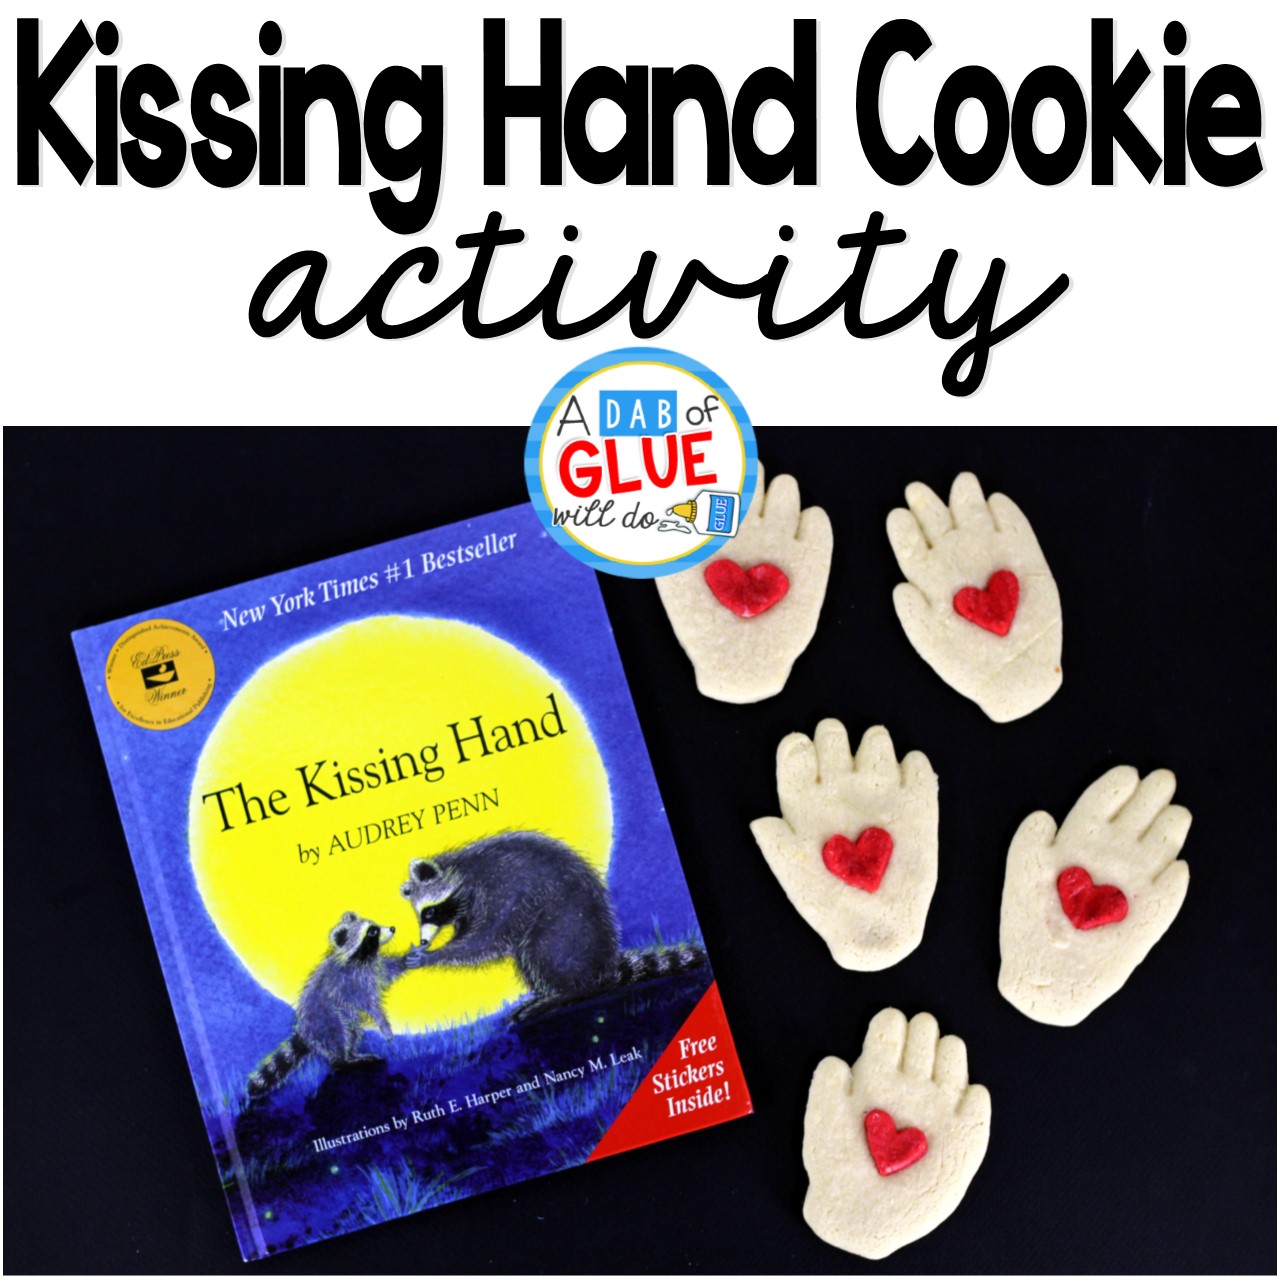 One of my favorite activities to do on the first day is to read The Kissing Hand to my students and enjoy a tasty kissing hand cookie to celebrate making it through our first day of school.